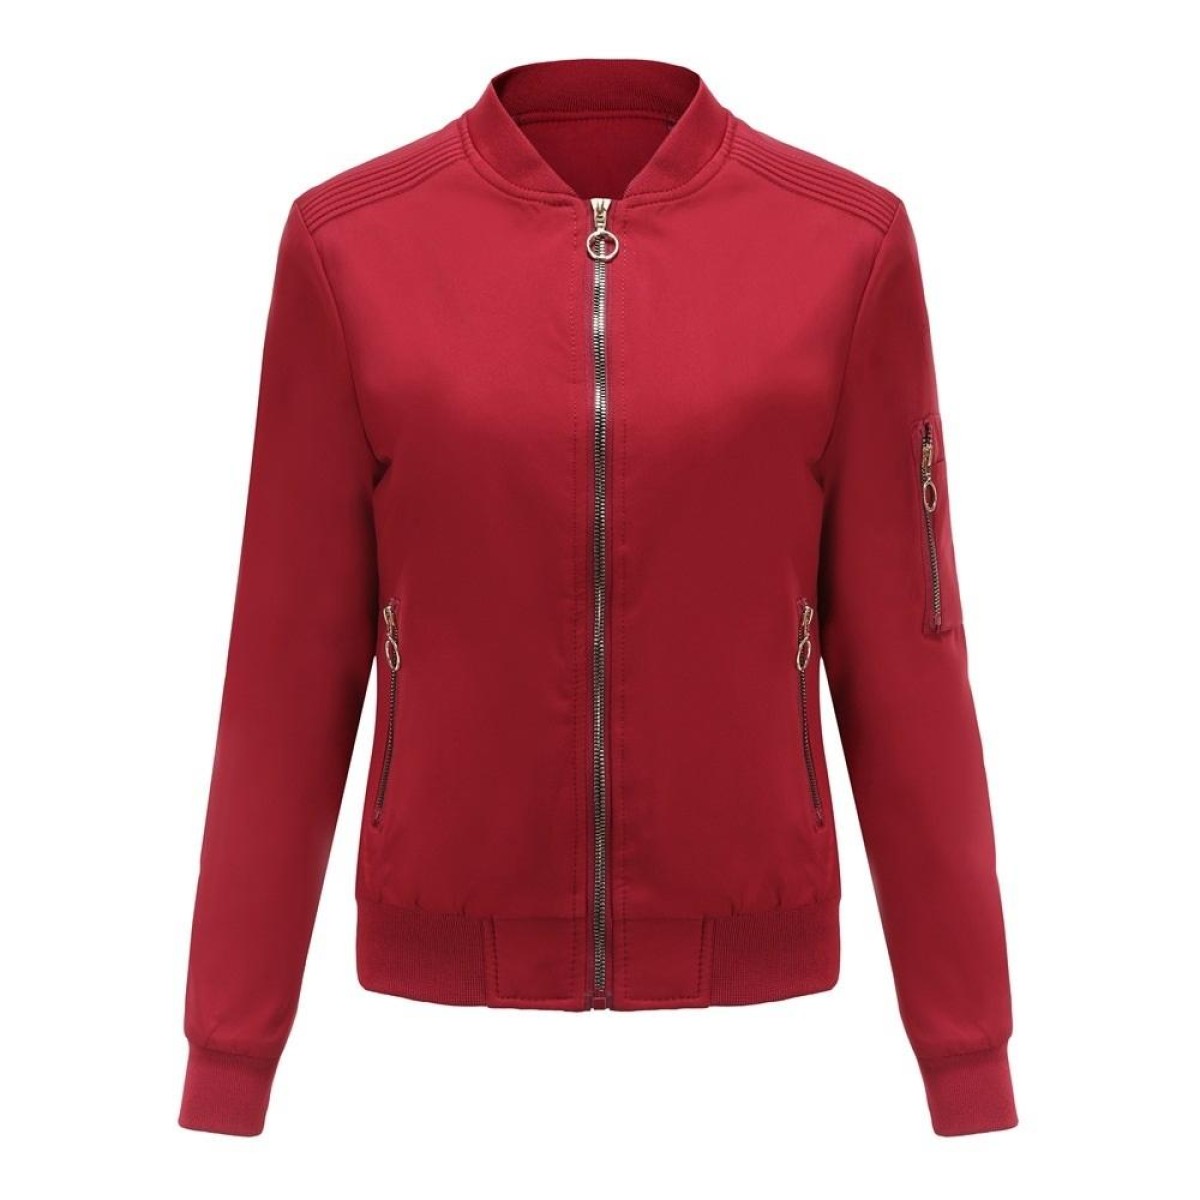 Autumn And Winter Thin Cotton Zipper Jacket Casual Coat For Women (Color:Wine Red Size:XL)